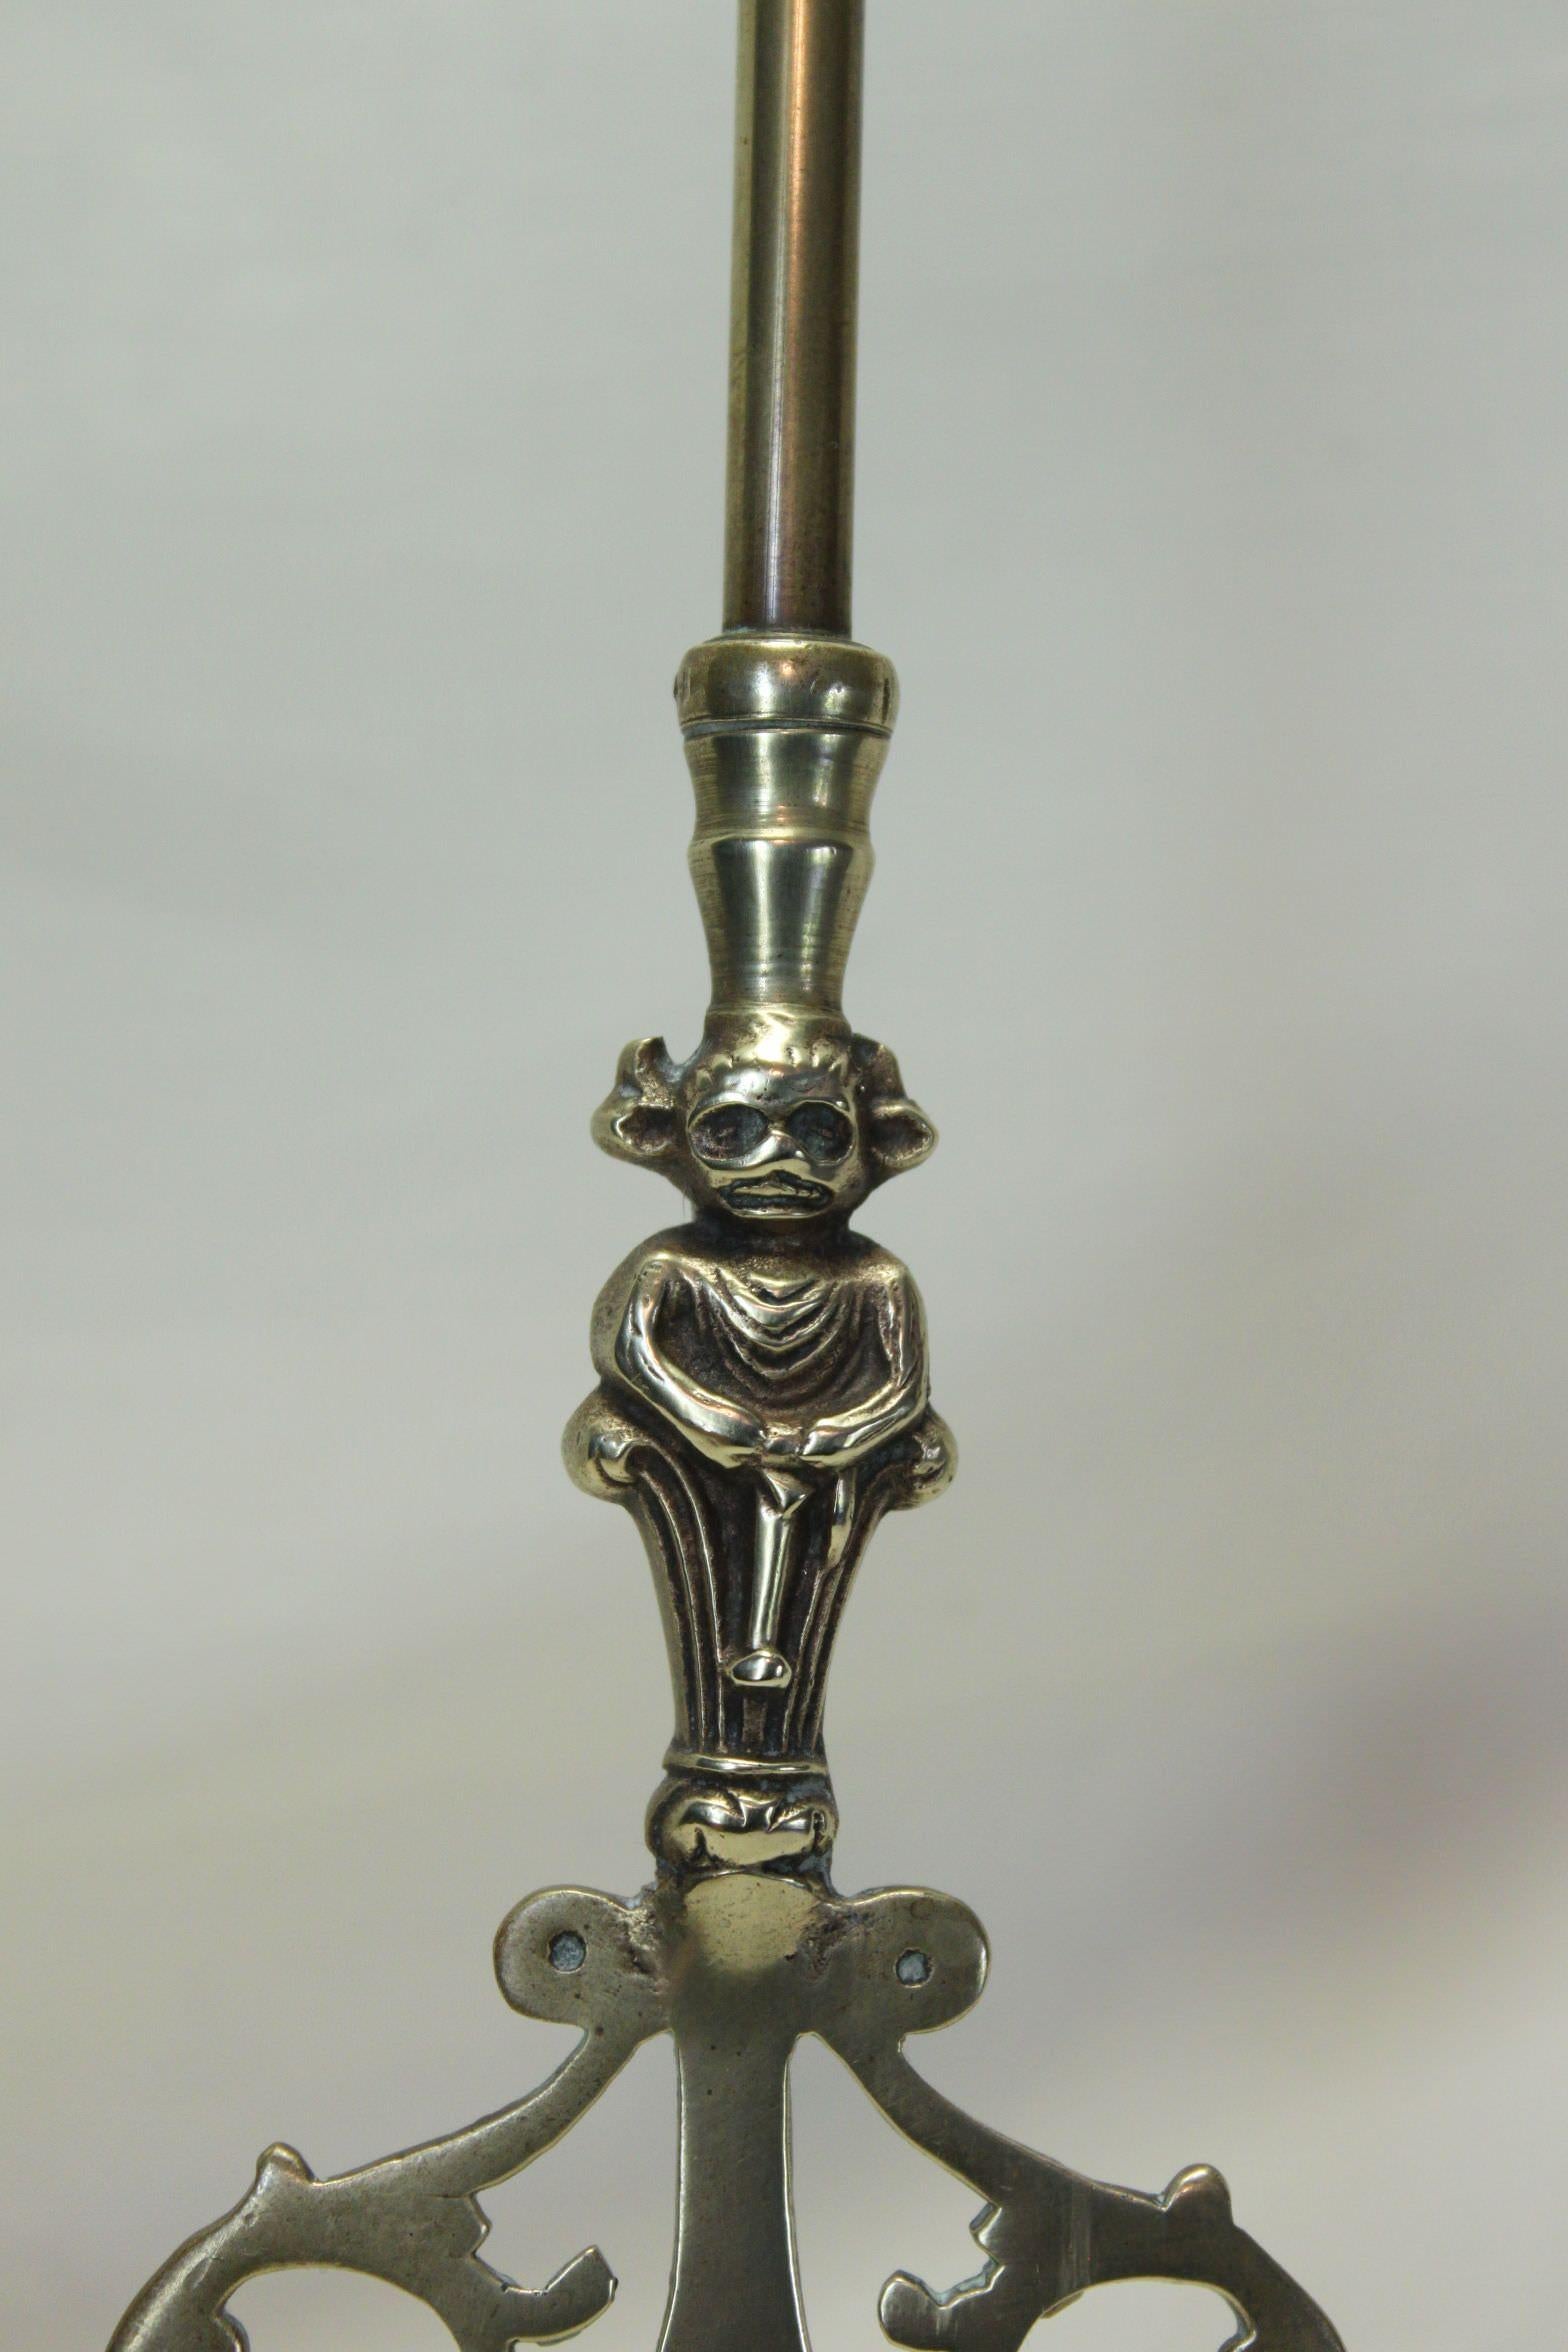 This decorative brass toasting fork is decorated with a good quality casting of the 